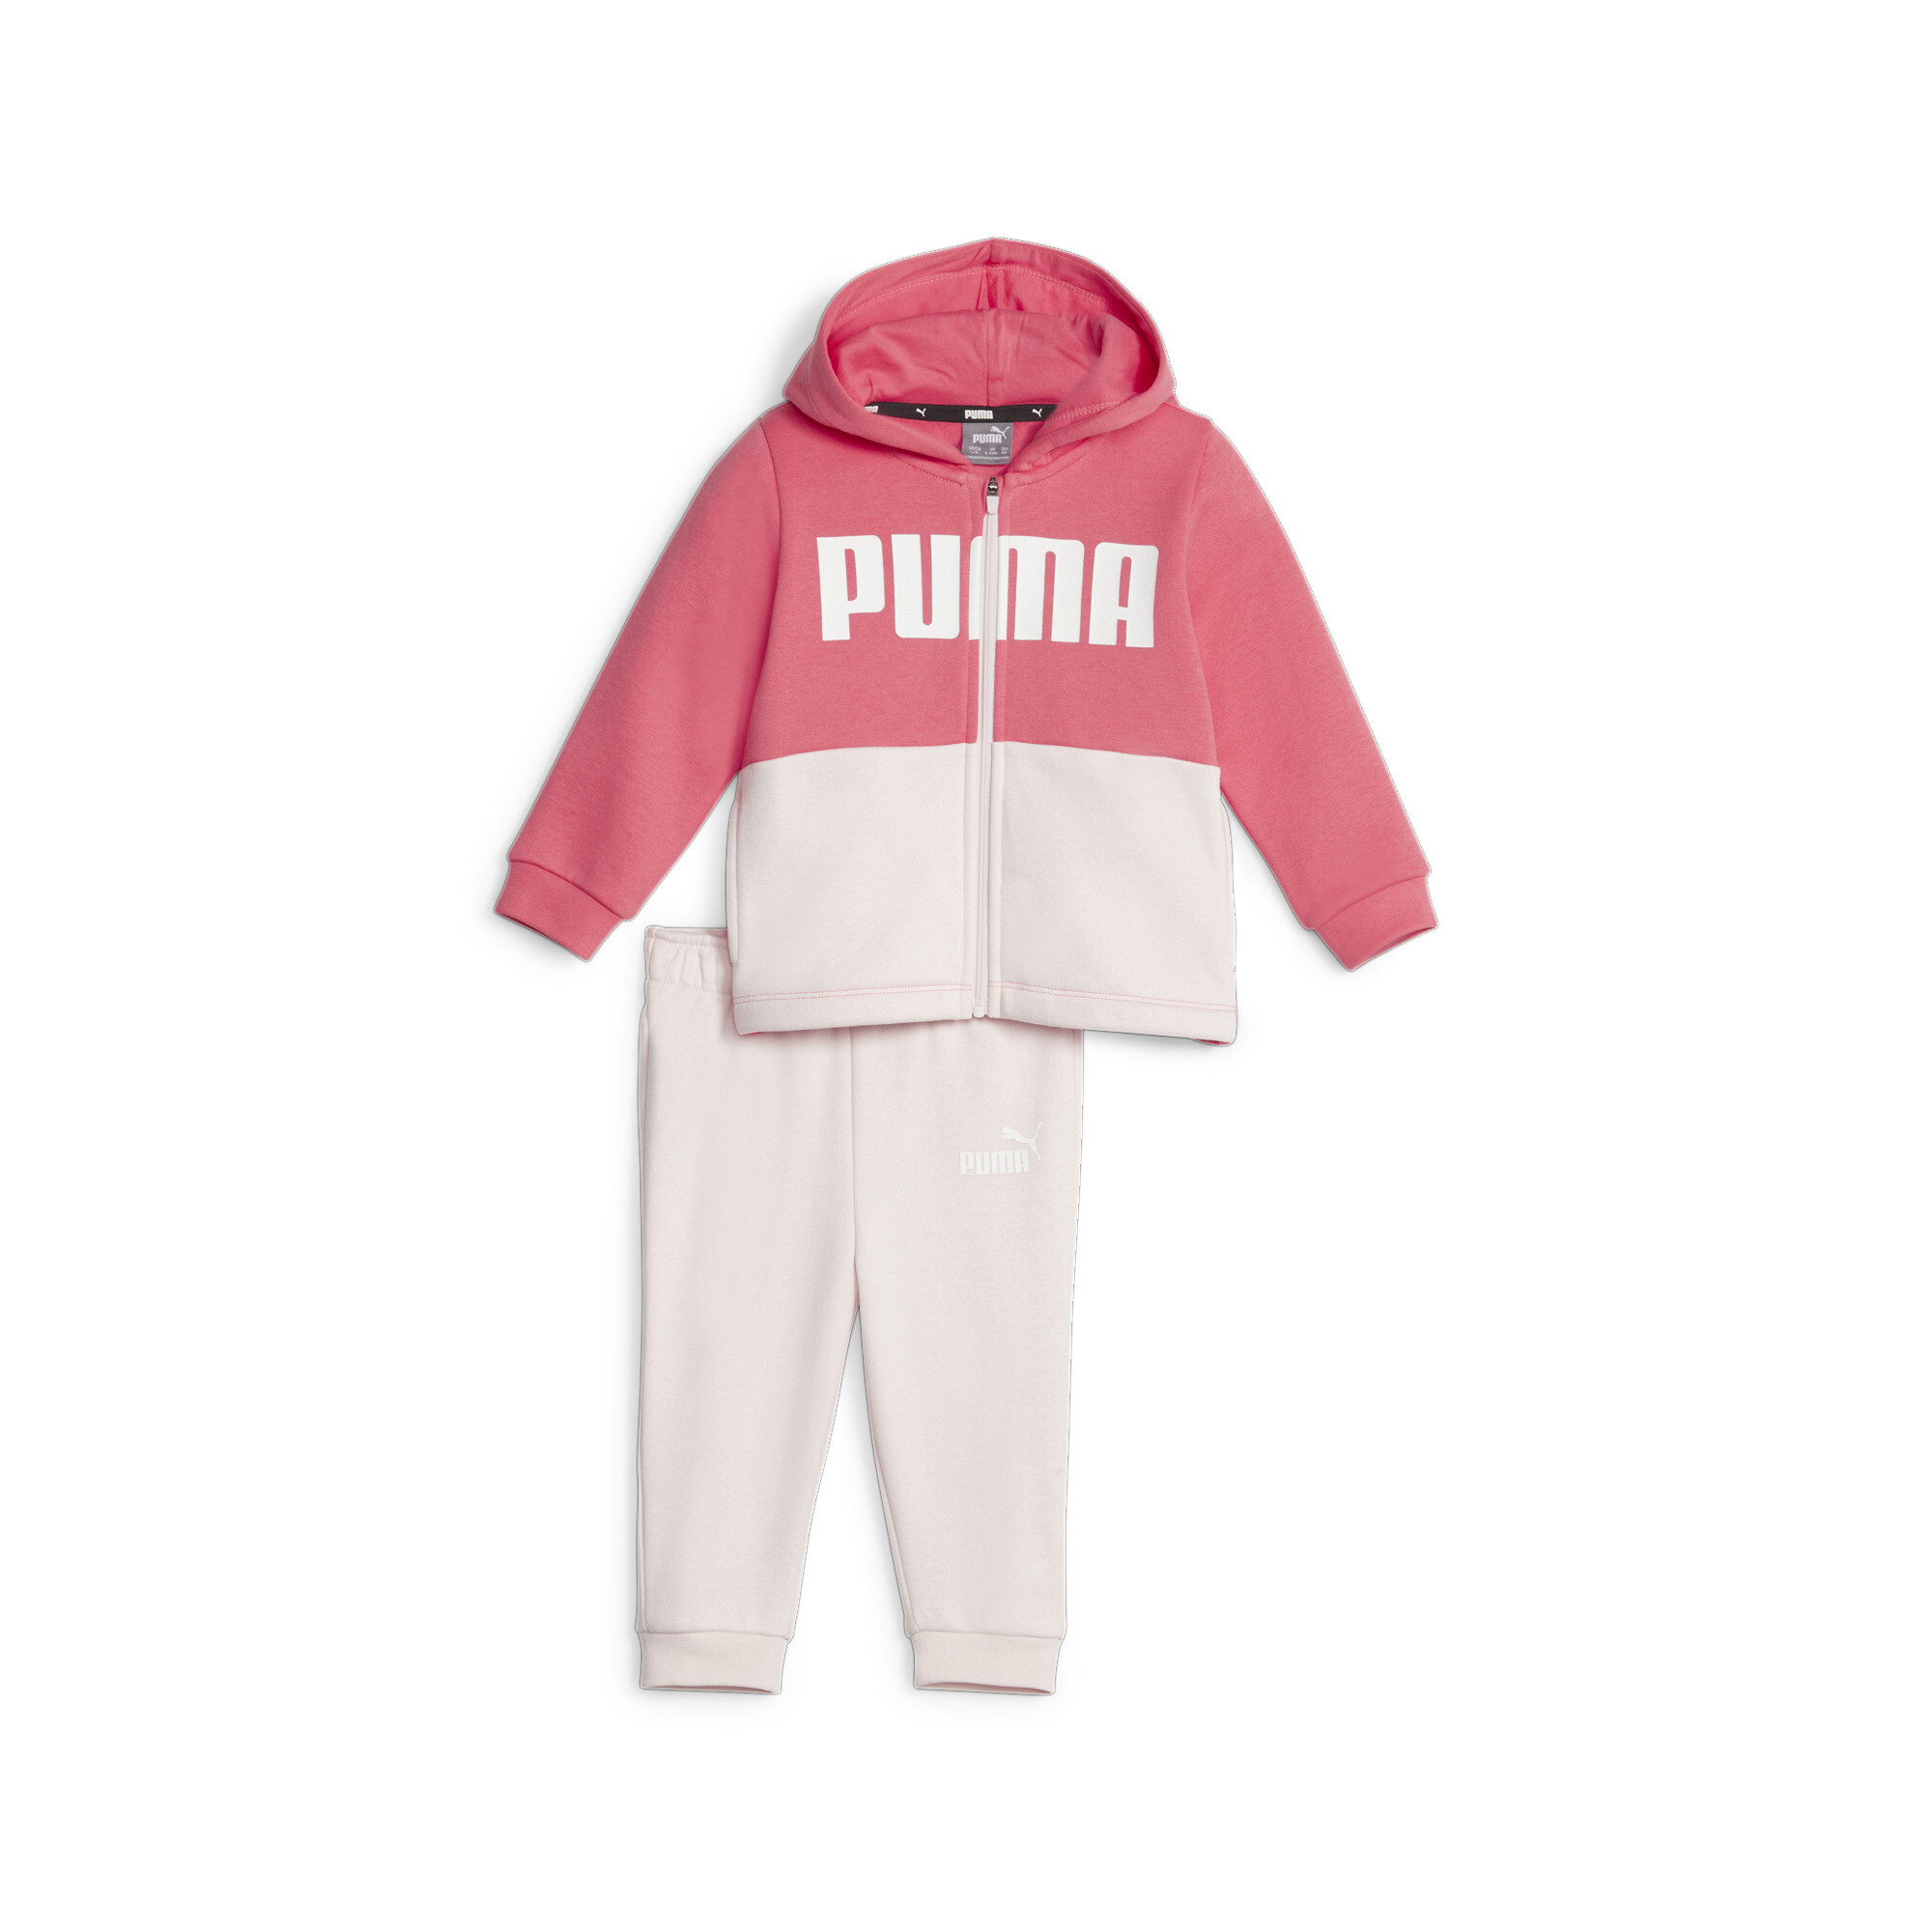 PUMA Minicats Colourblock Jogger Suit Babies In Pink, Size 3-4 Youth